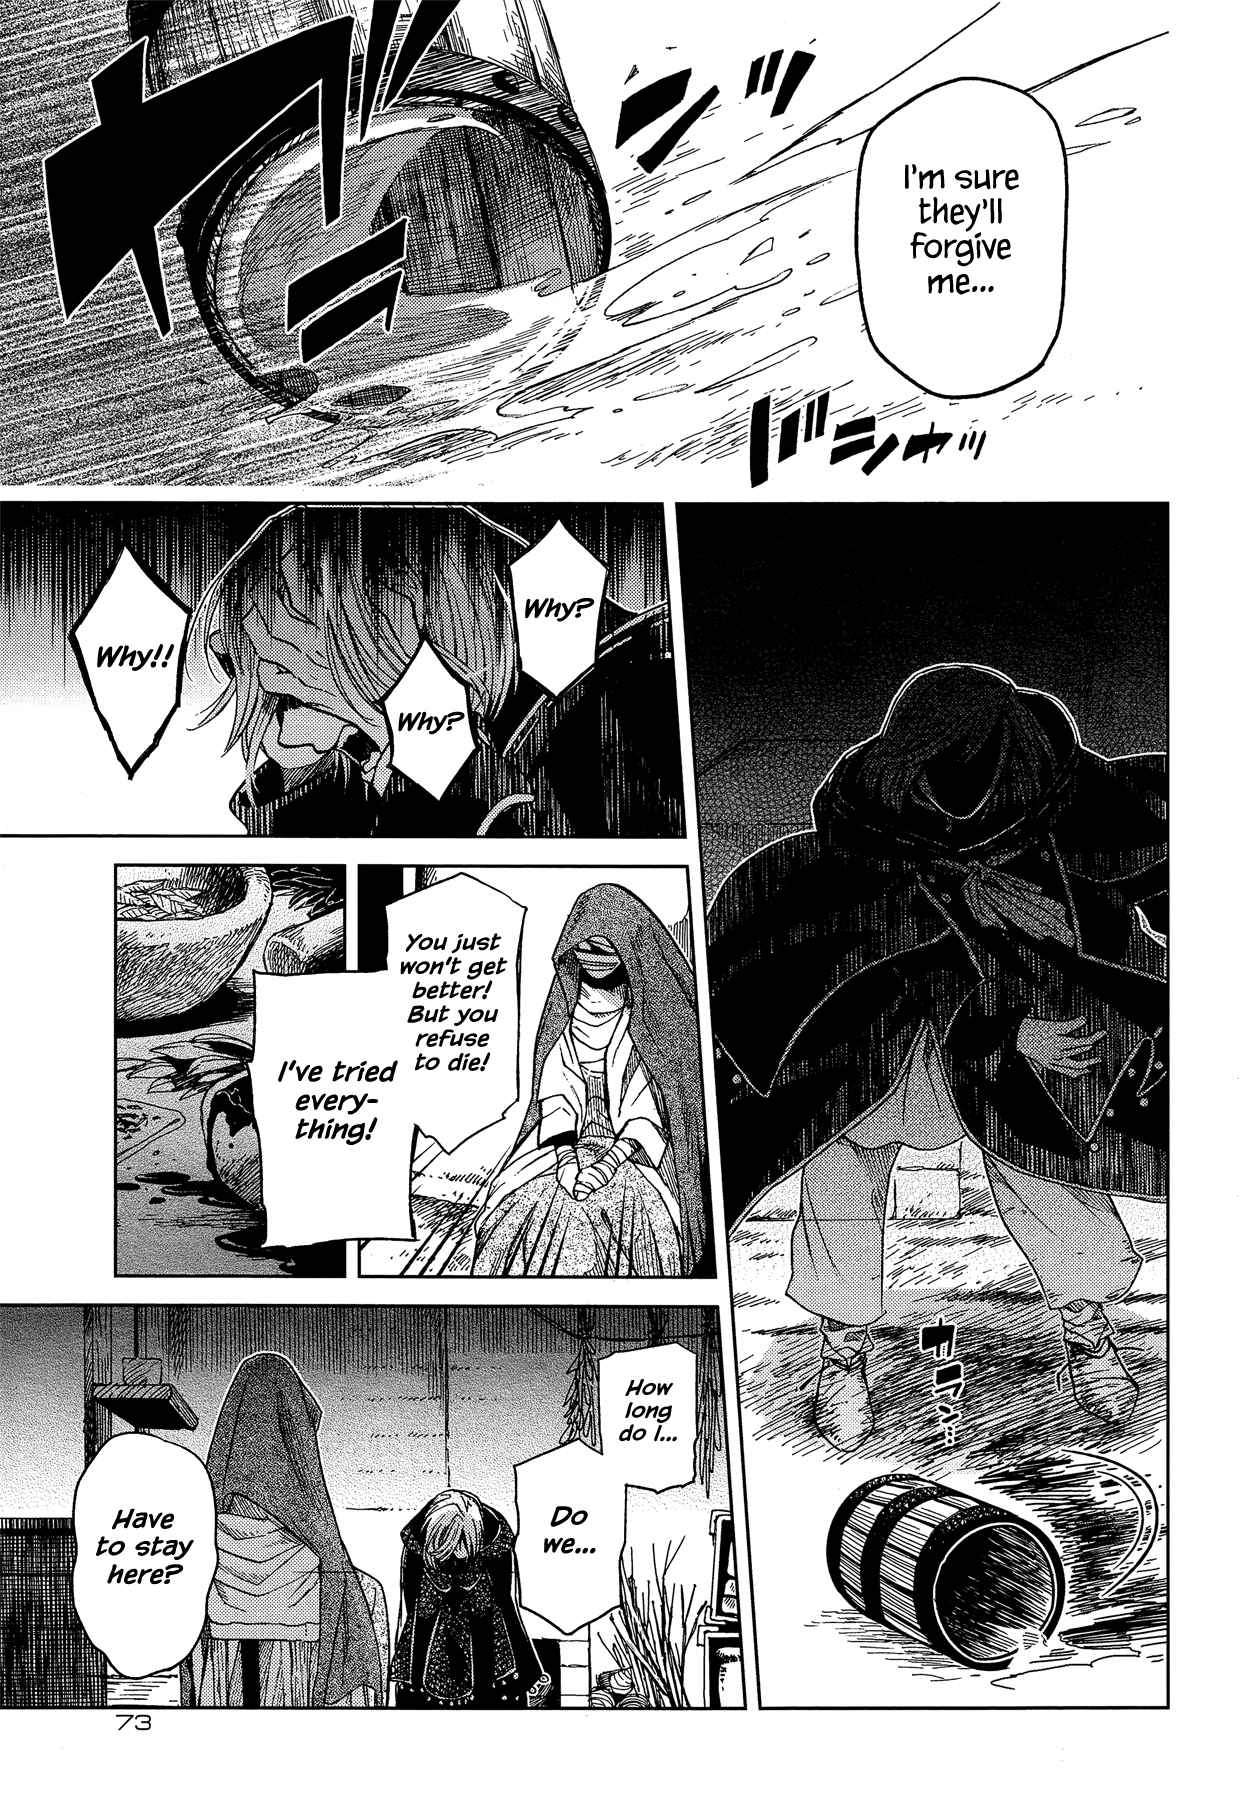 The Ancient Magus' Bride Vol. 9 Ch. 43 The Road To Hell is Paved With Good intentions